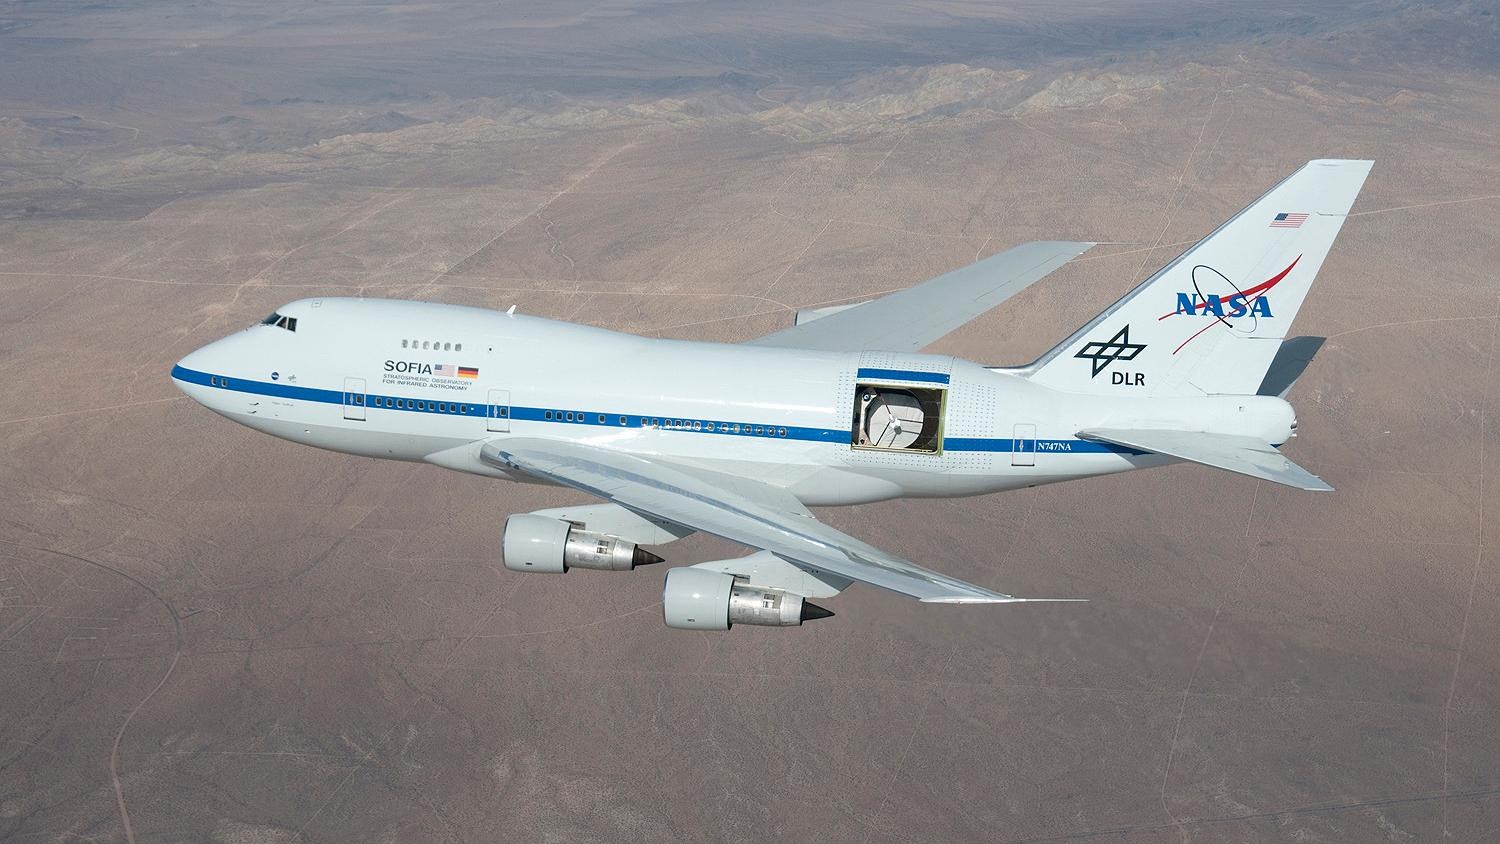 The Stratospheric Observatory for Infrared Astronomy SOFIA